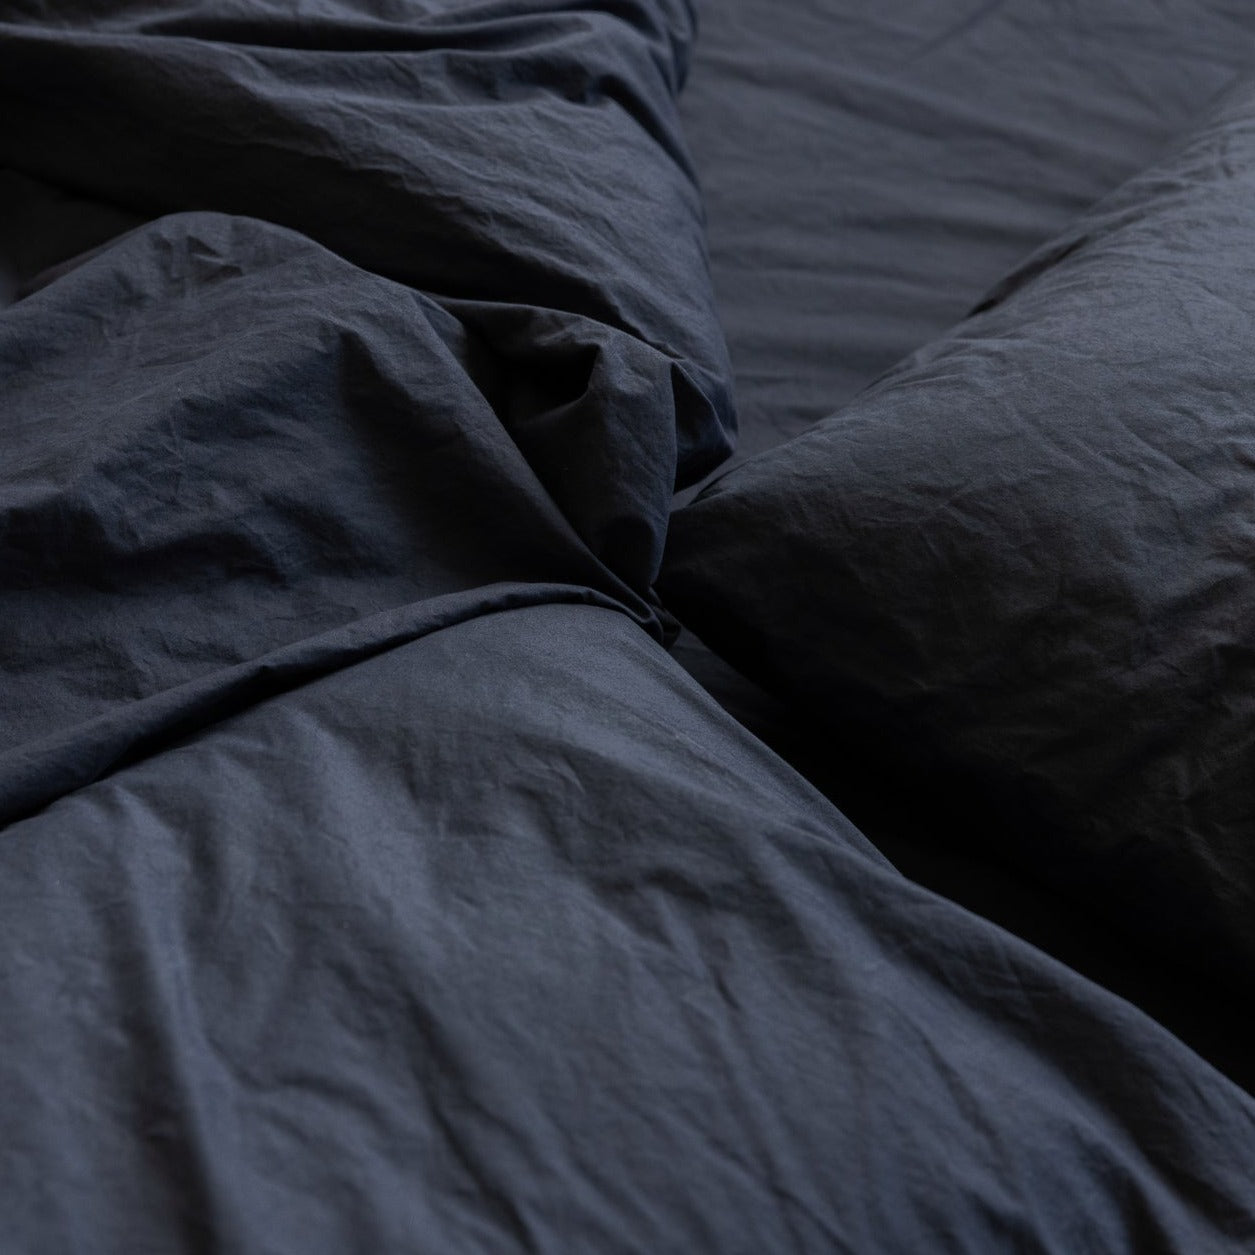 Duvet Cover "Deep" (Washed cotton)